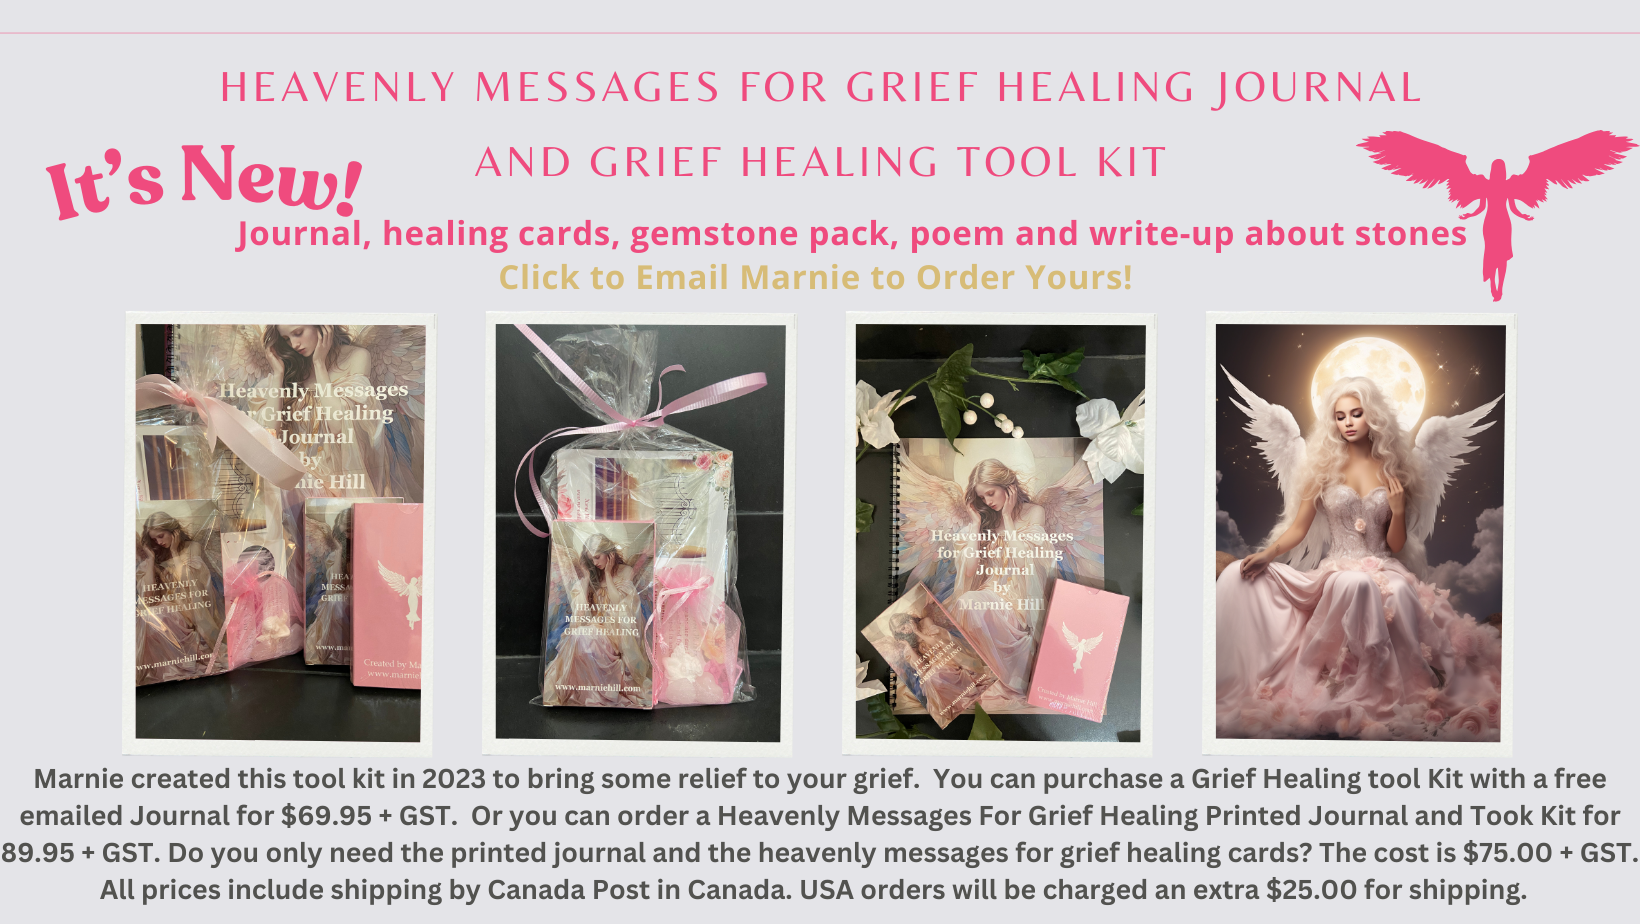 Heavenly-Messages-for-grief-Healing-Jurnal-and-Tool-Kit-2-1